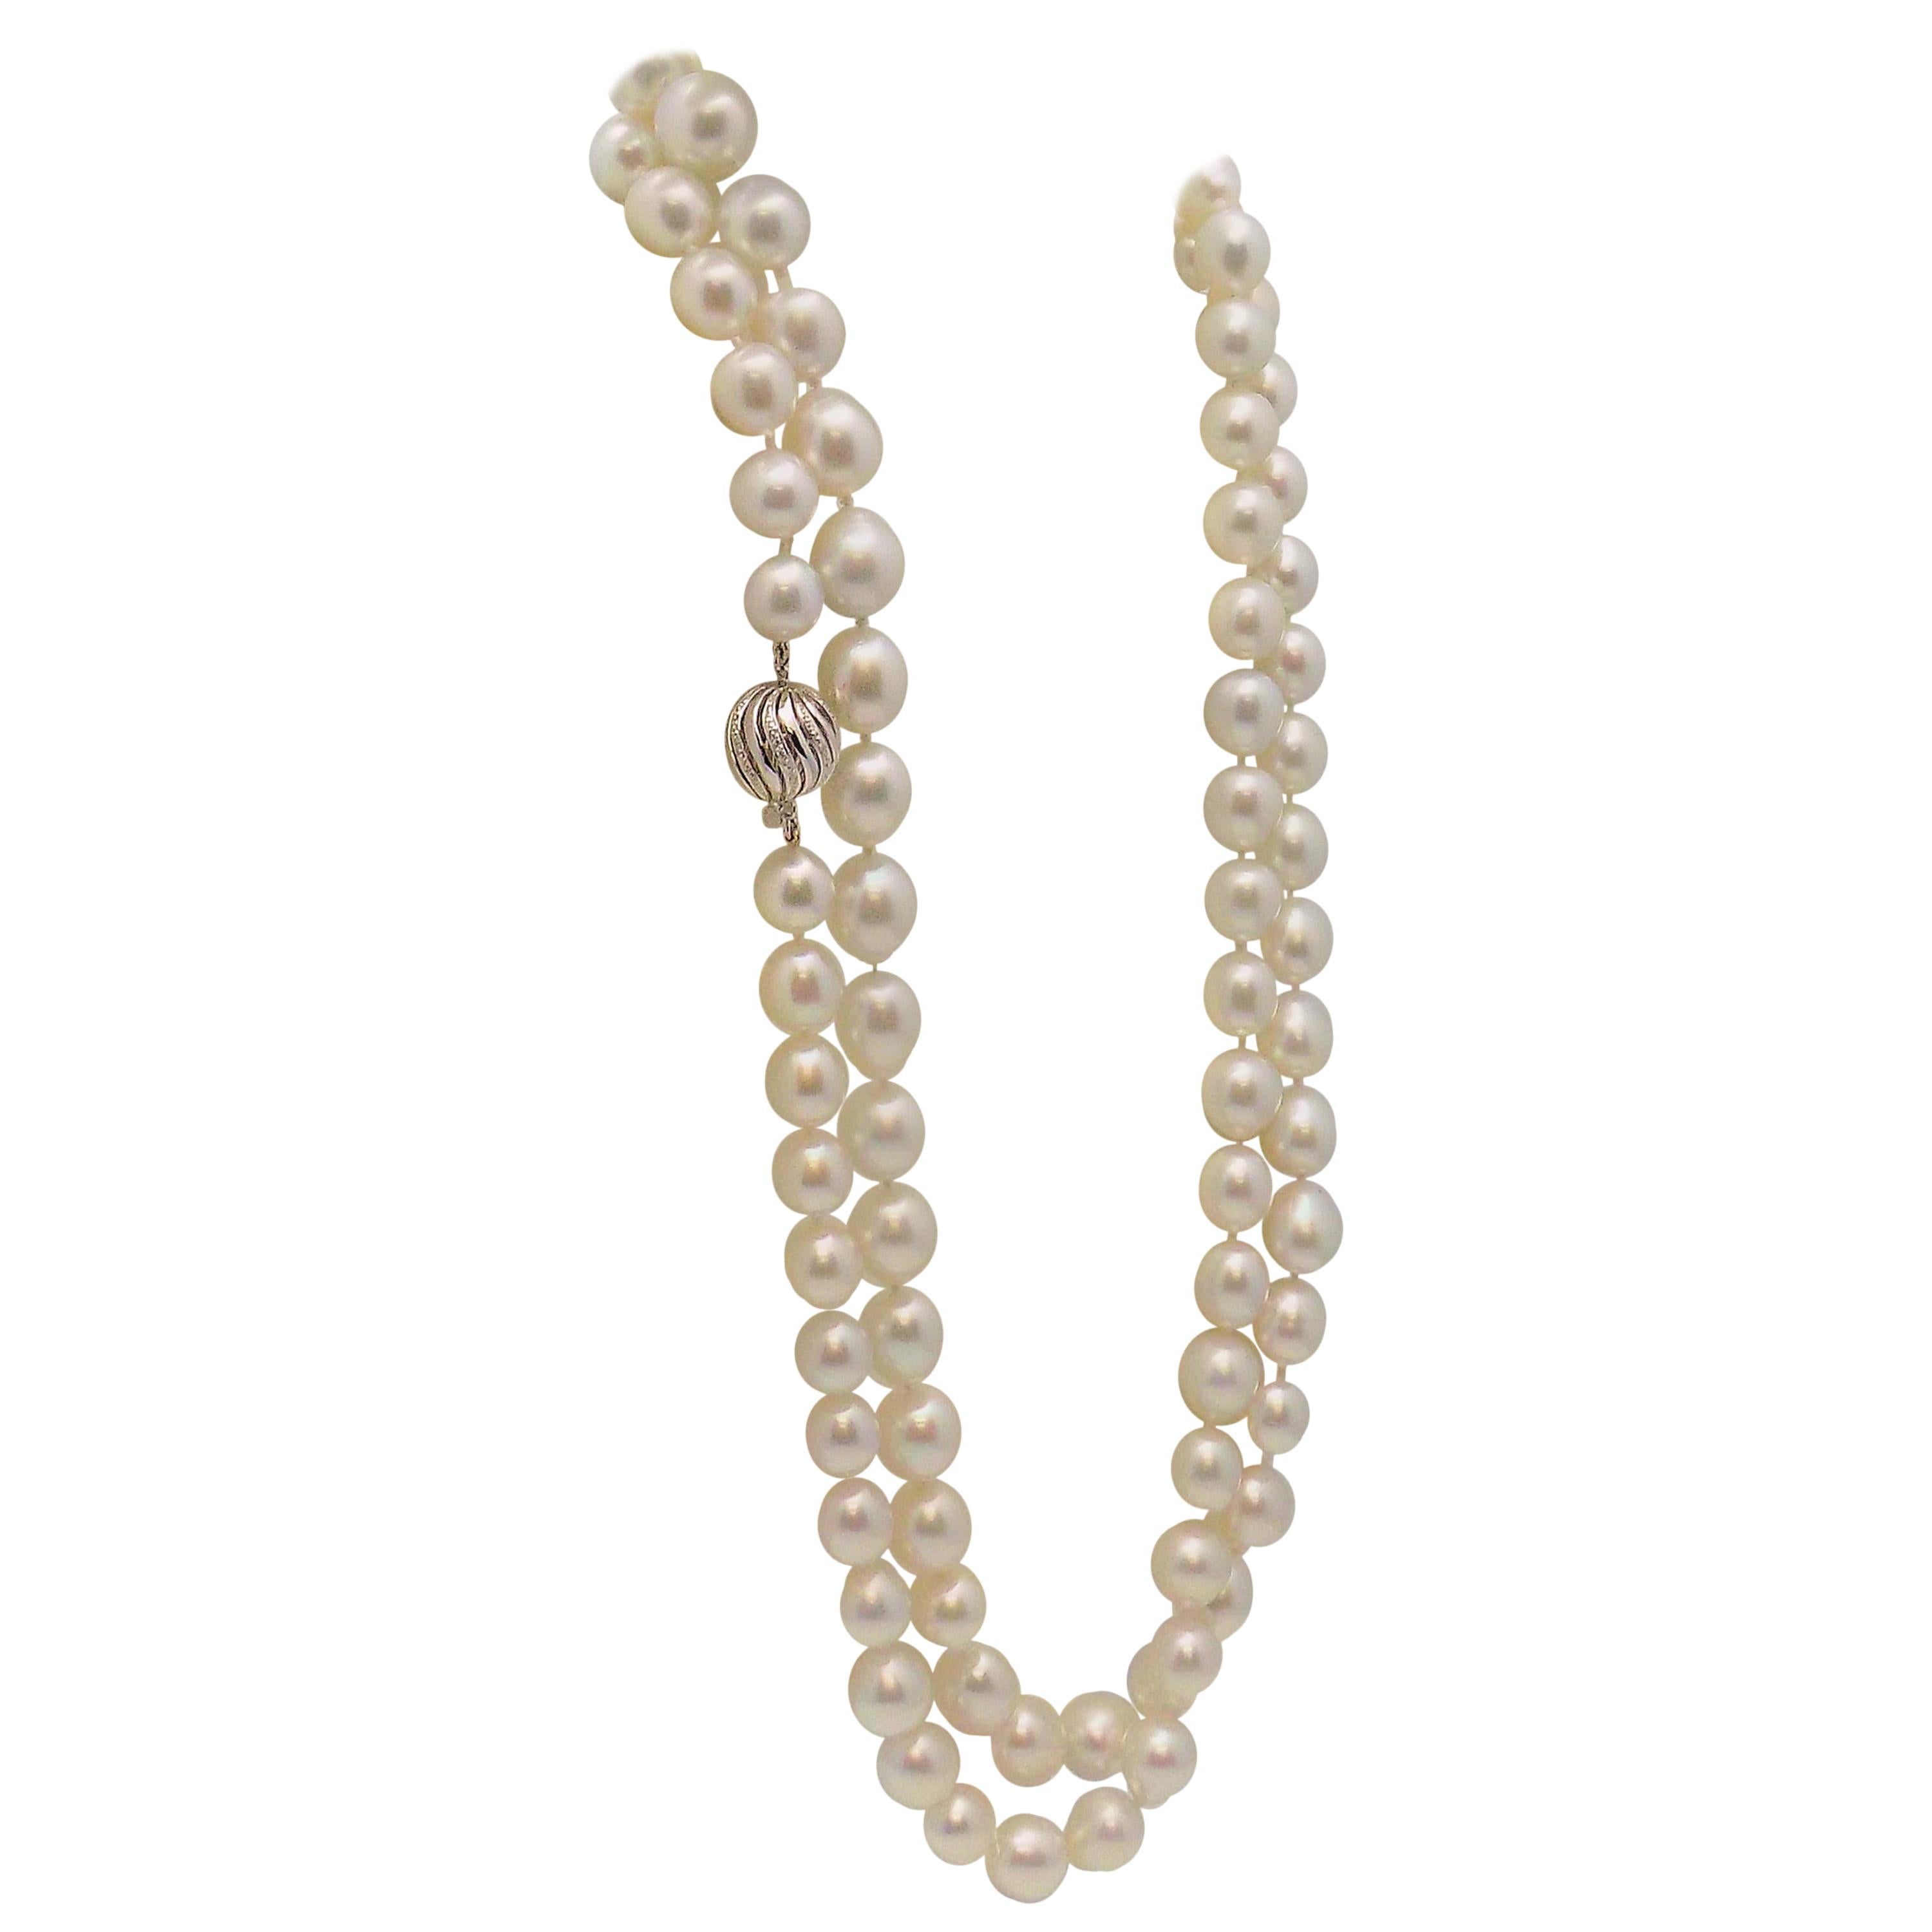 Strand 89 South Sea Cultured Pearls For Sale